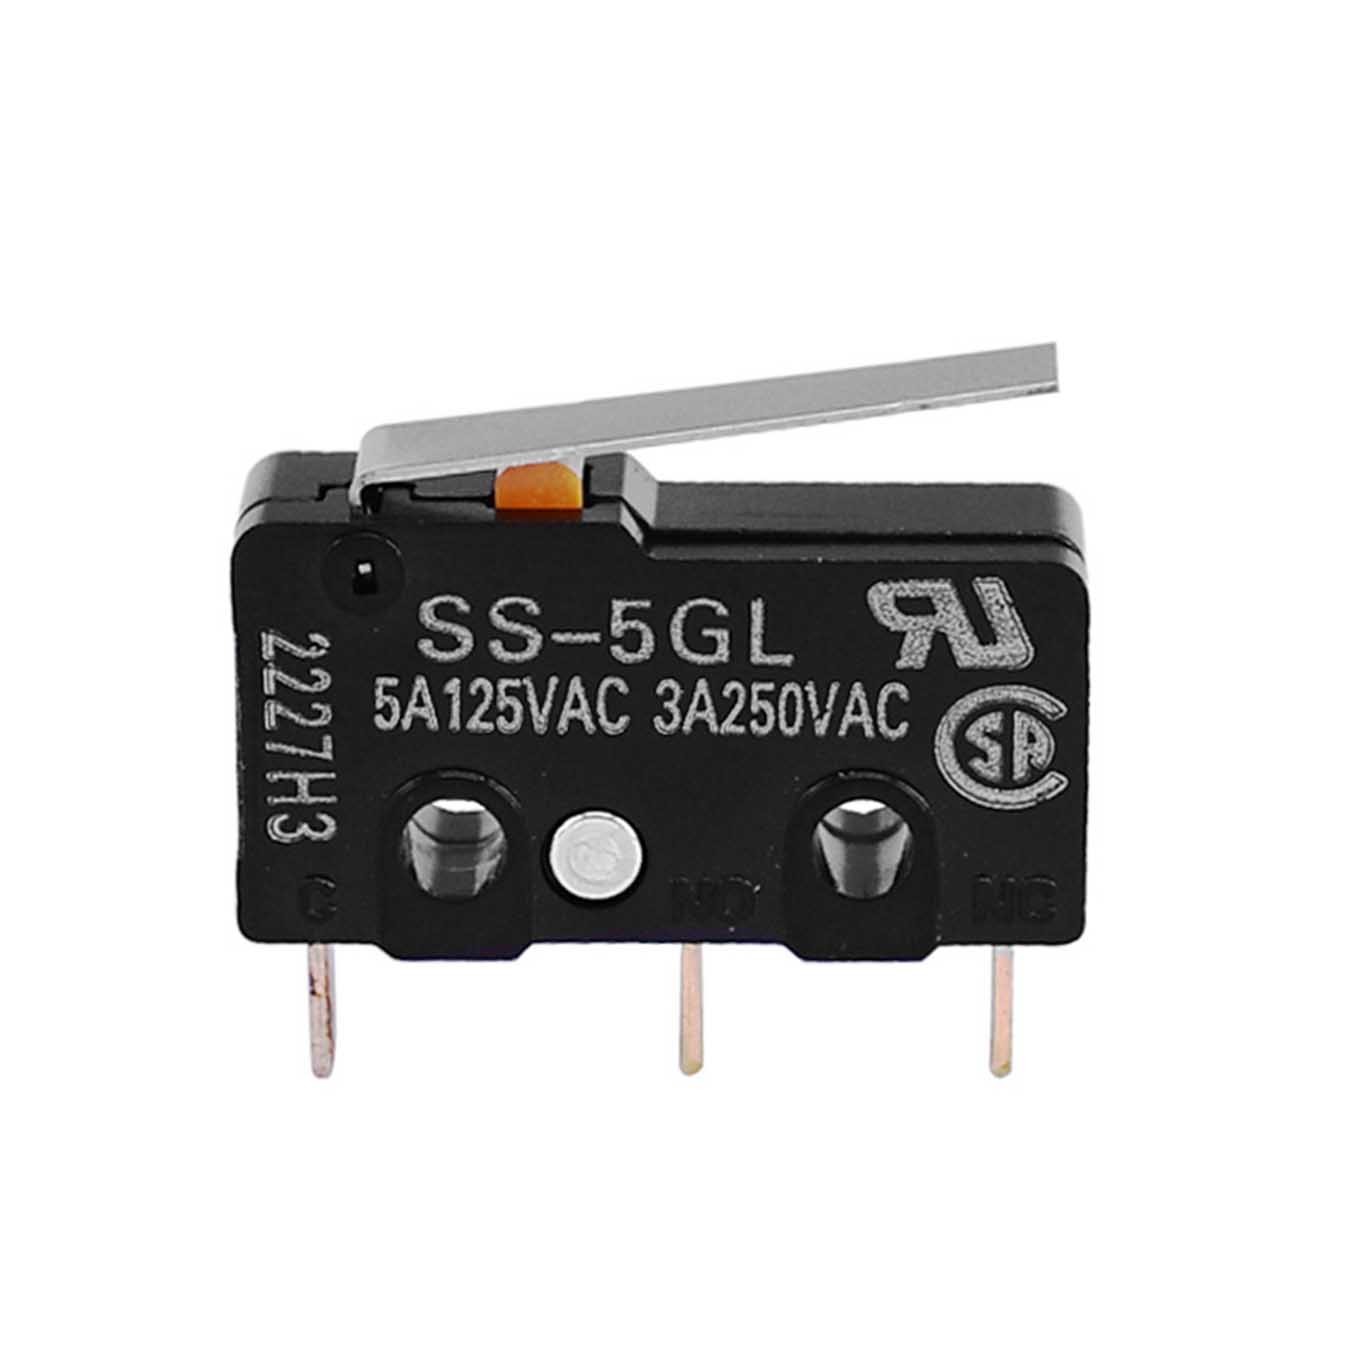 Buy cheap Microswitch 5A 125V SS 5GL Limit Switch Integrated Circuits Parts product